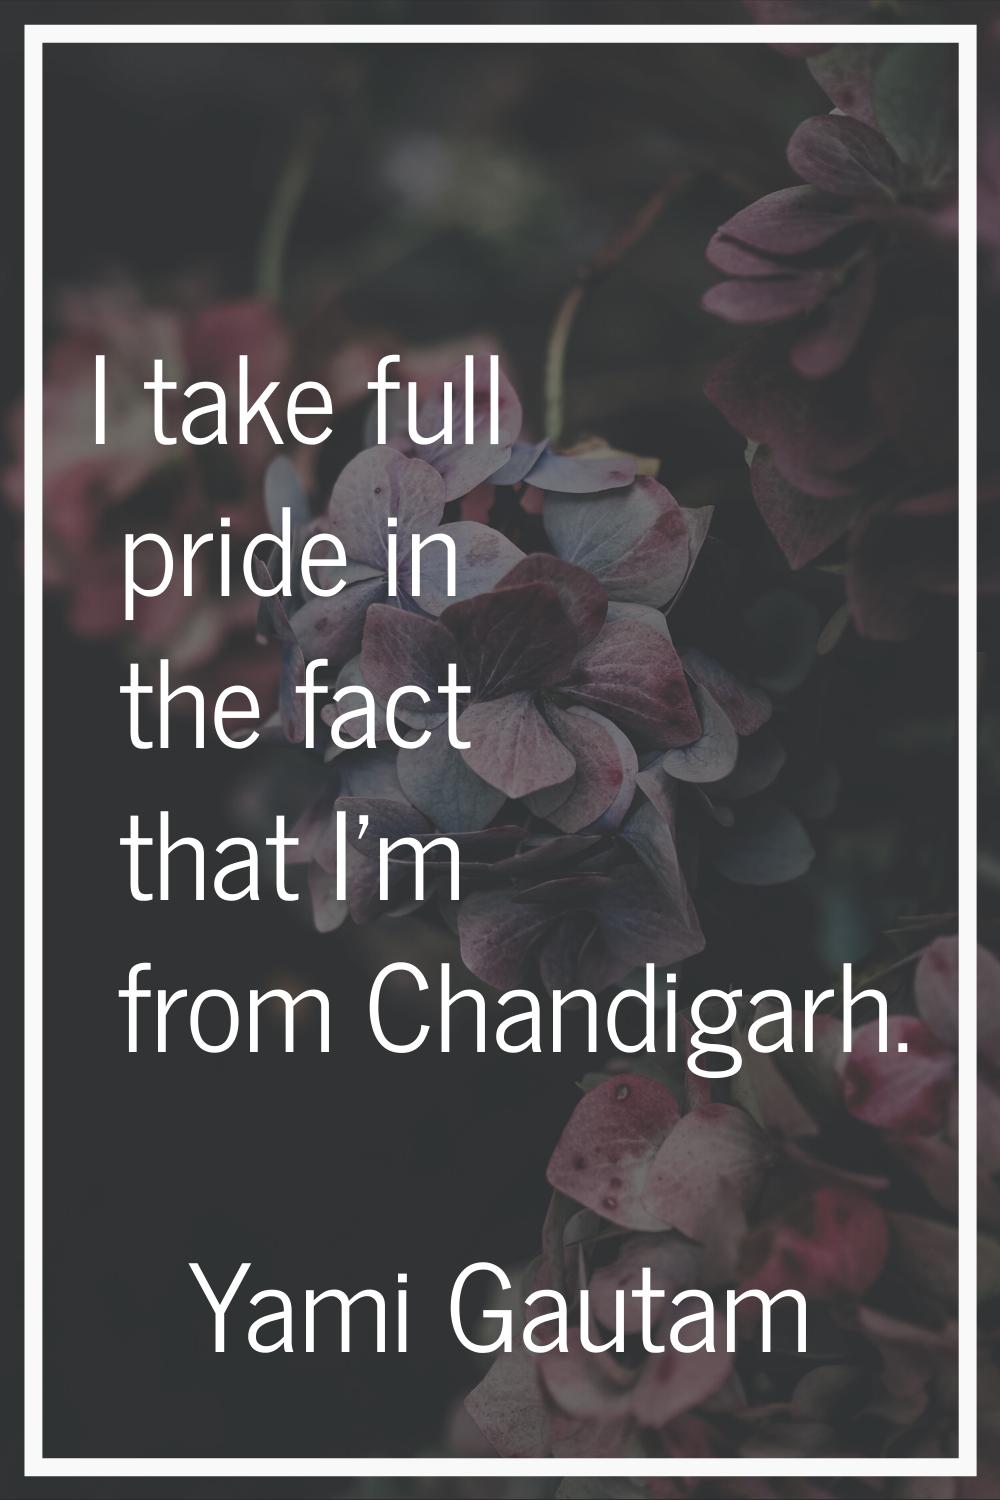 I take full pride in the fact that I'm from Chandigarh.